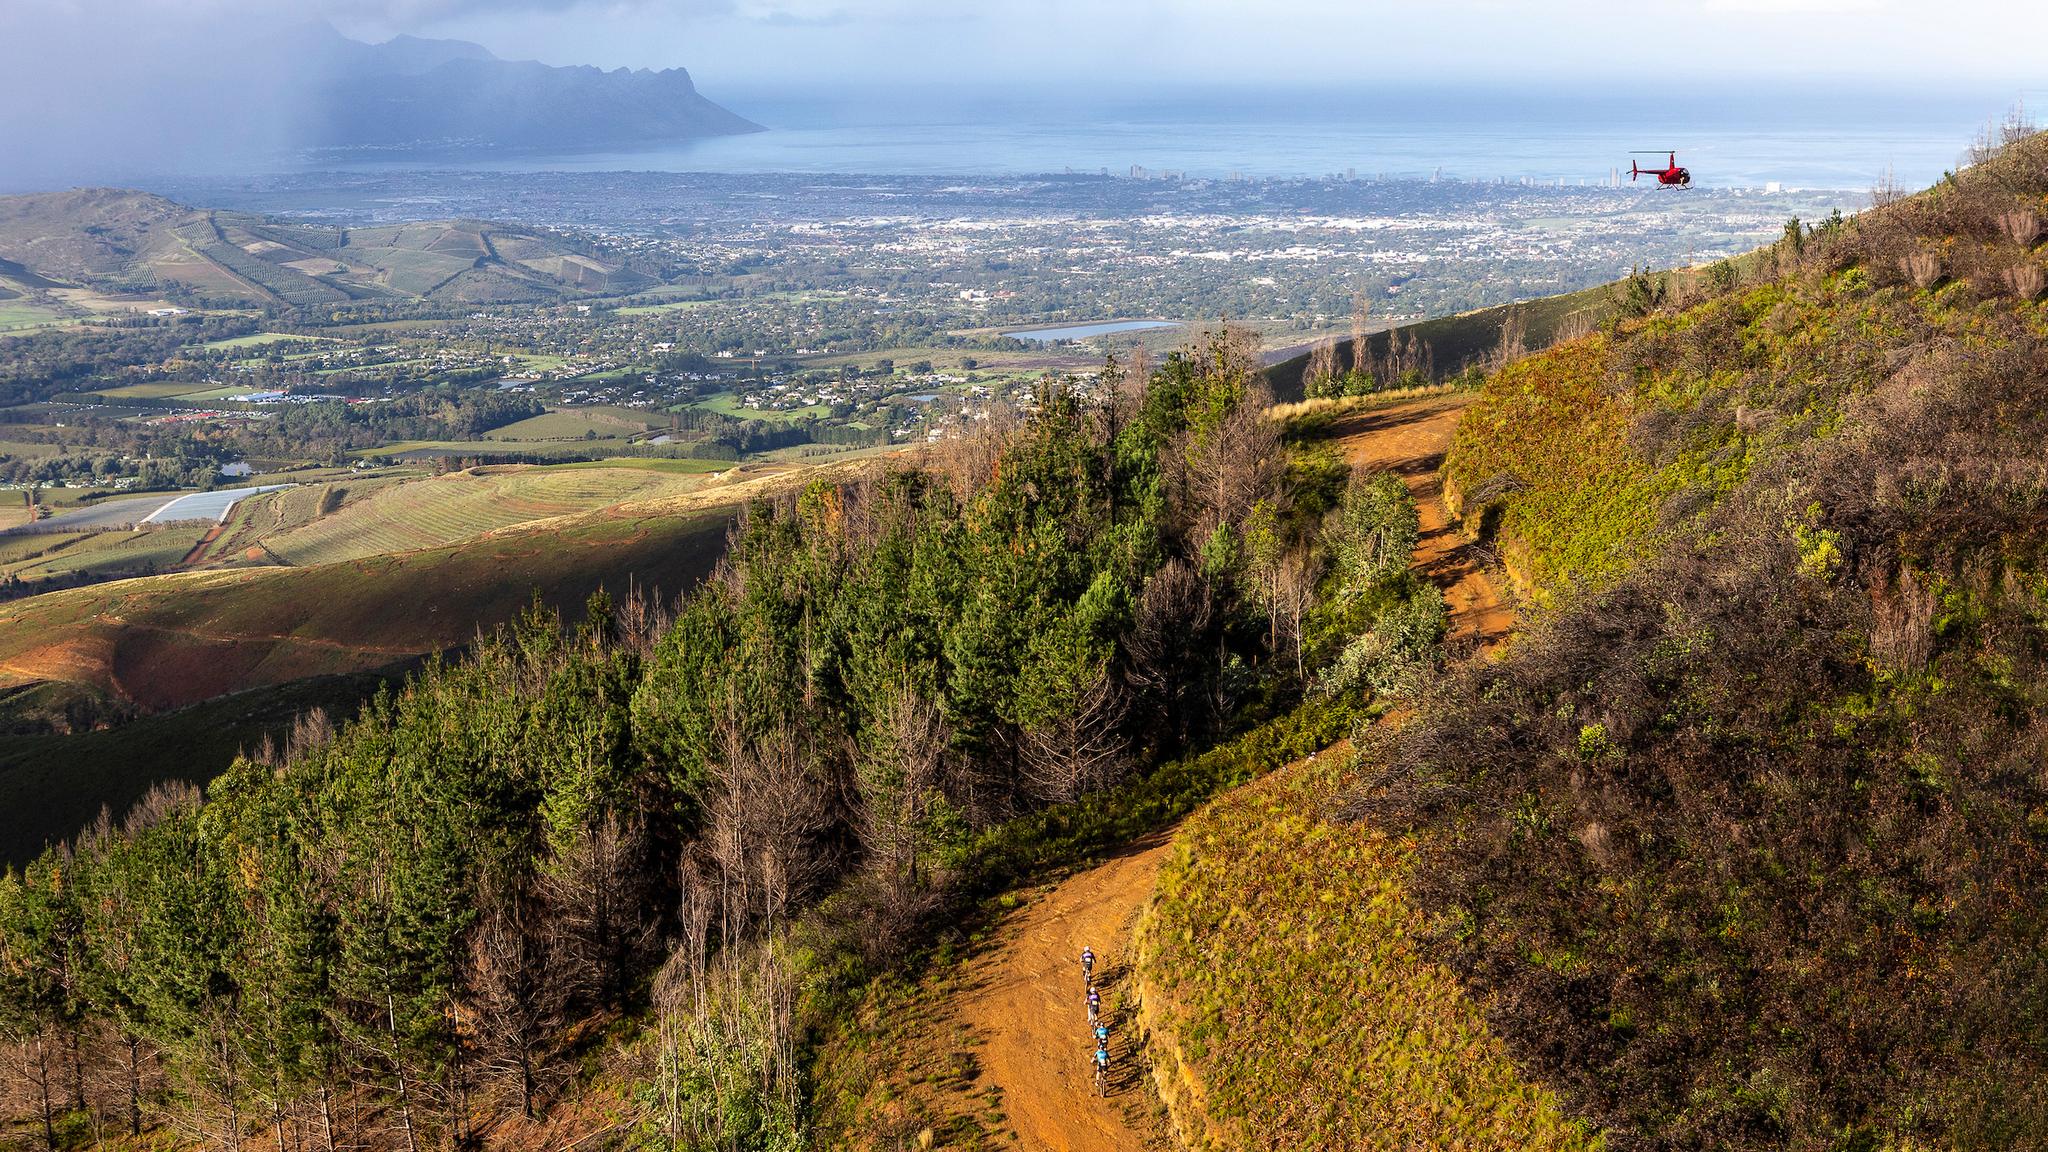 Absa Cape Epic 2023, Stage 7